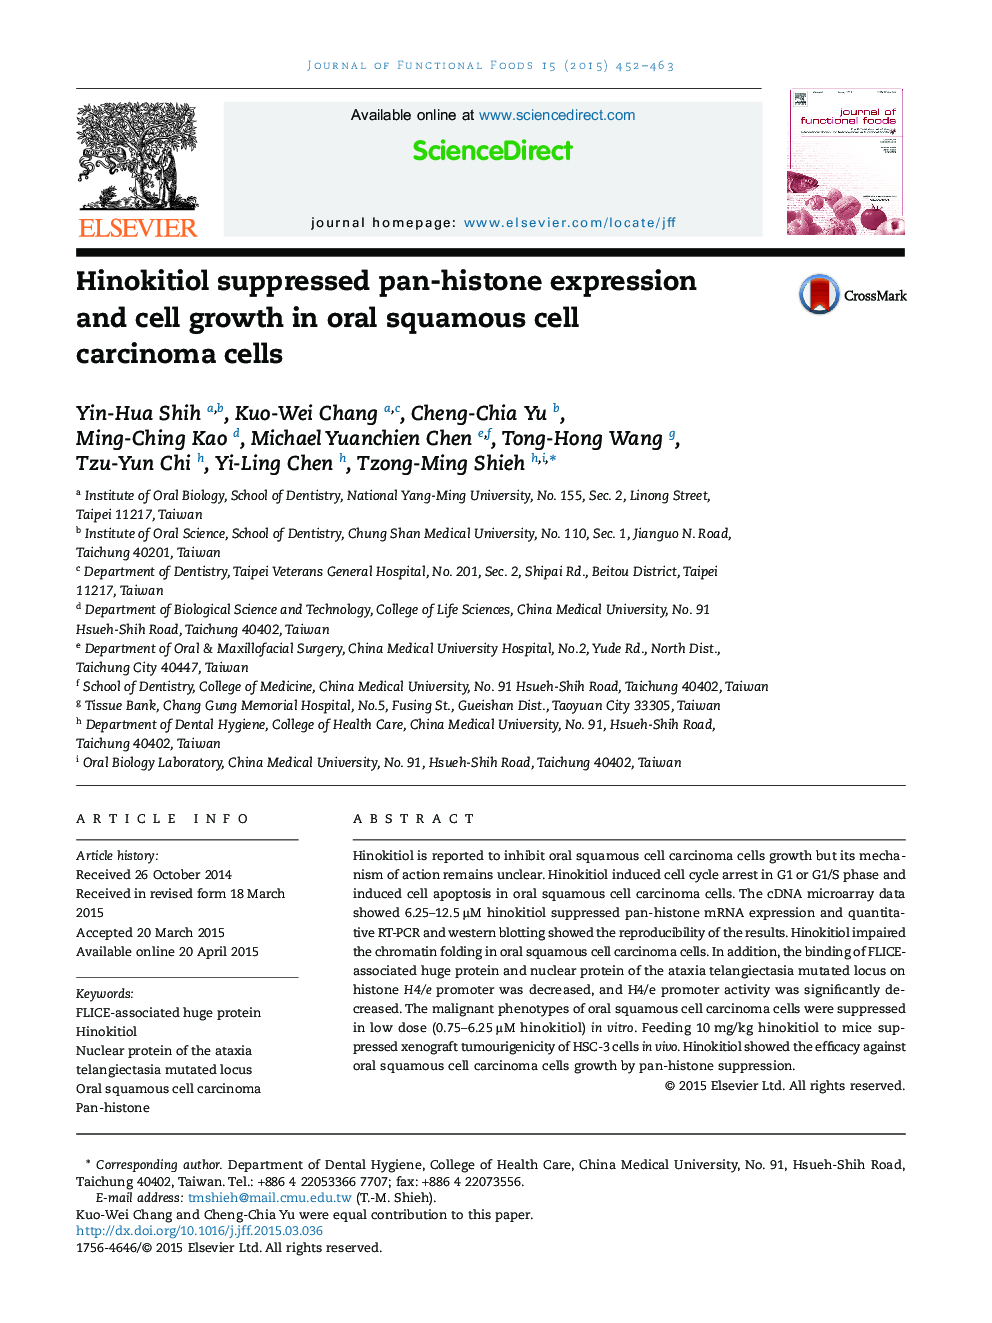 Hinokitiol suppressed pan-histone expression and cell growth in oral squamous cell carcinoma cells 